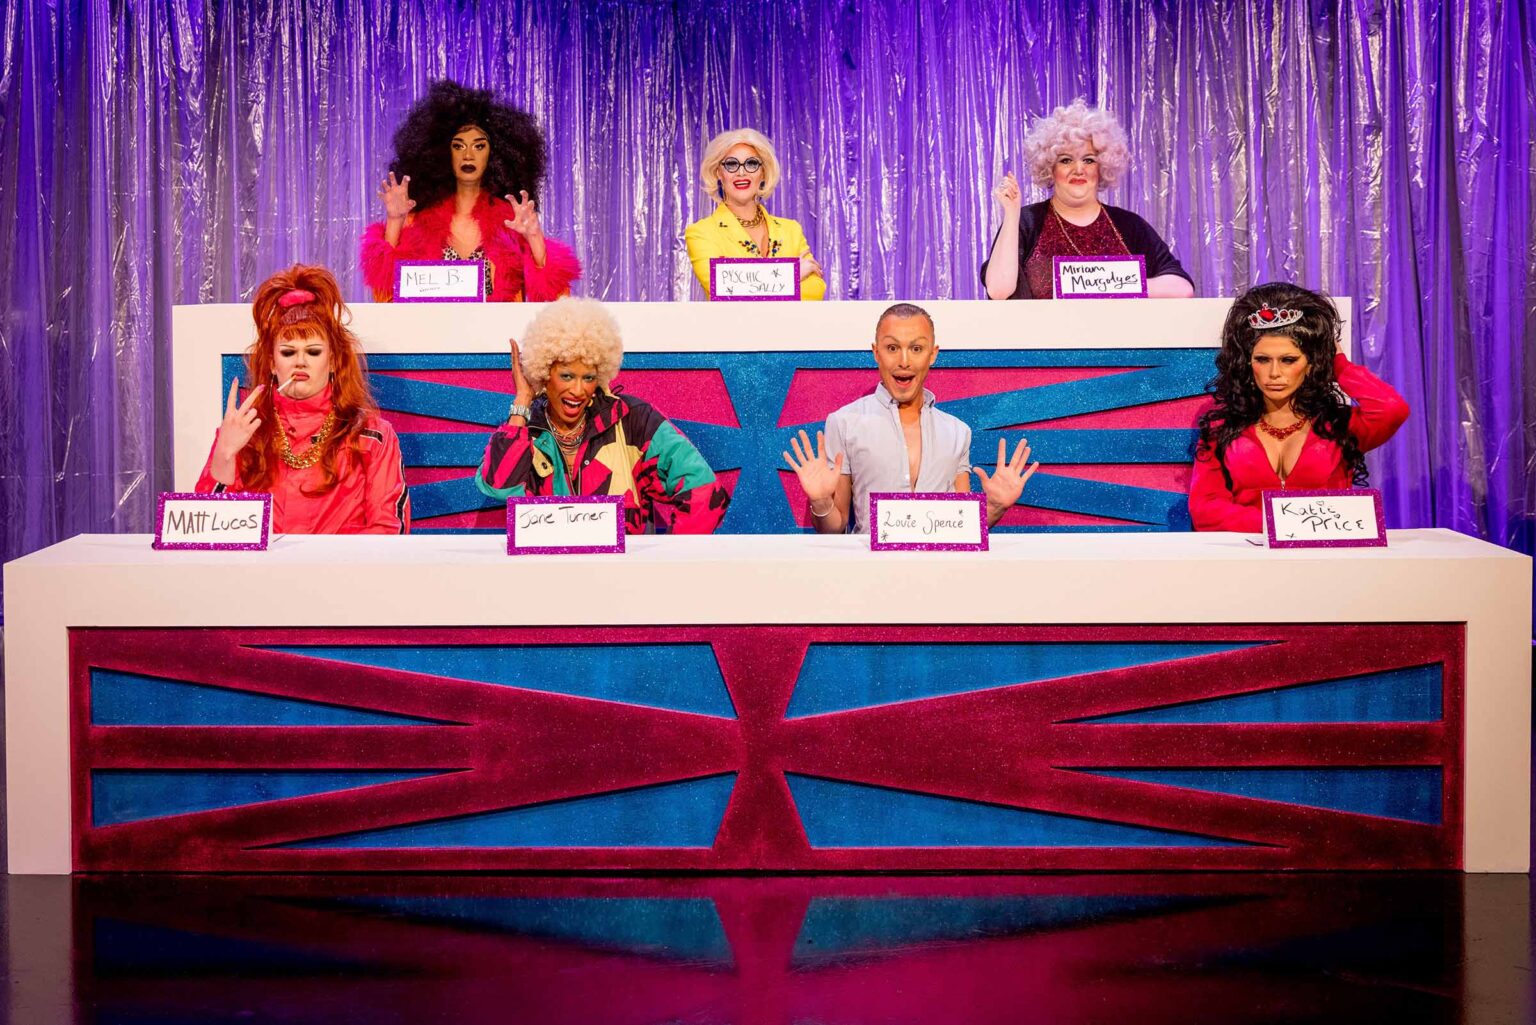 Snatch Game is an iconic 'Drag Race' challenge, and the UK version is no different. Here's the full story from the queen eliminated by the iconic challenge.